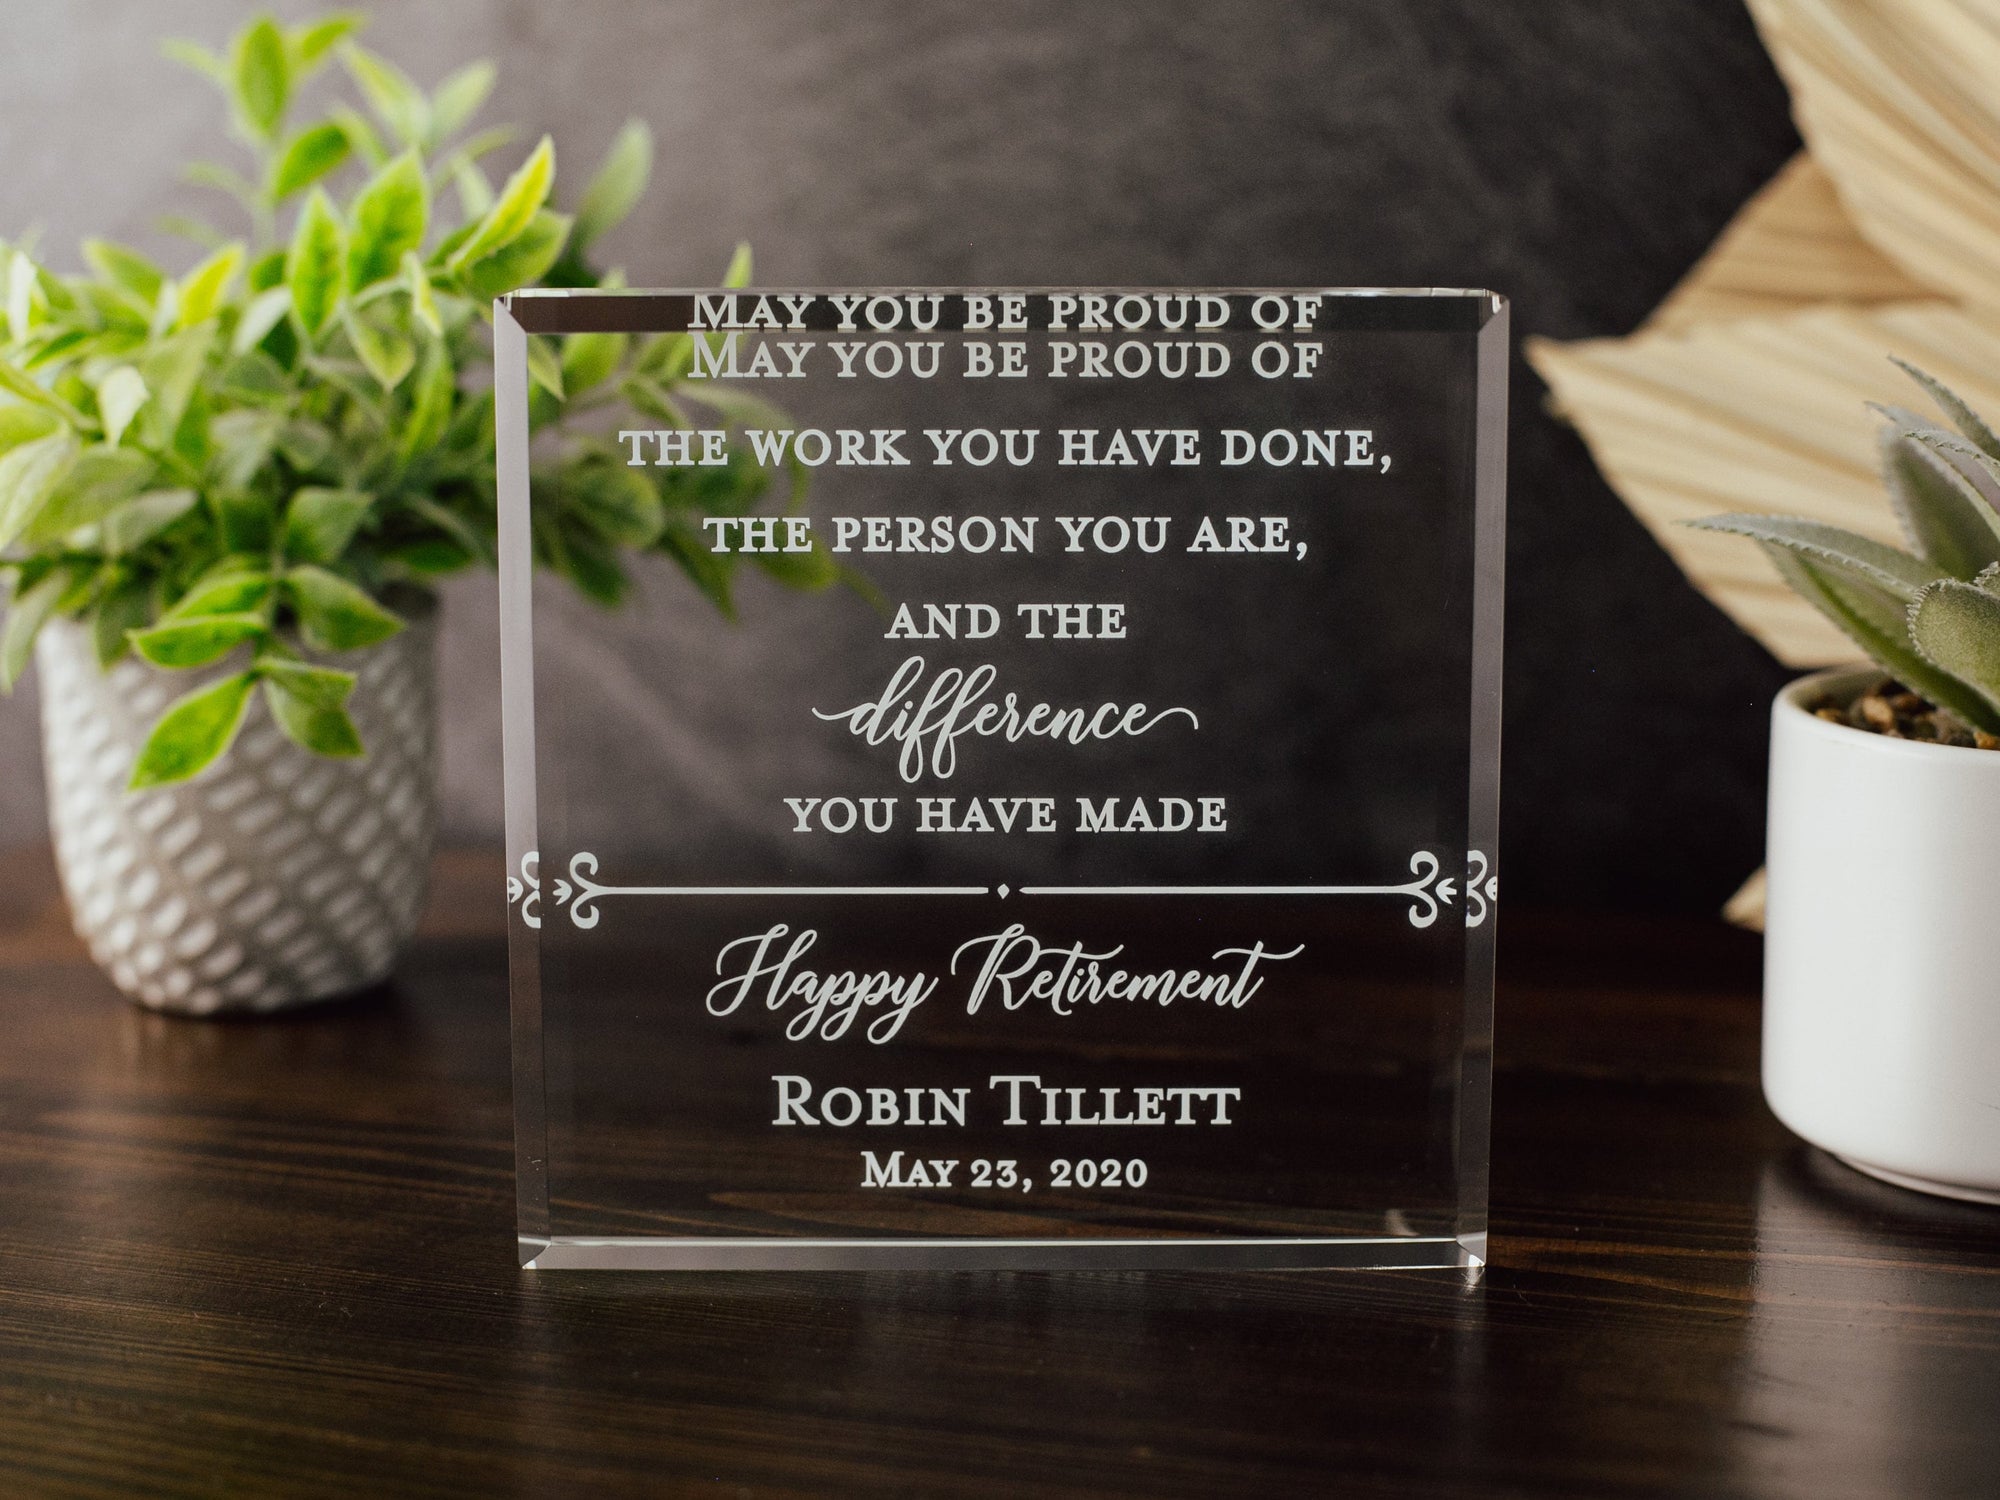 Happy Retirement Award Crystal Glass Plaque, for Employee Recognition, Staff Present, The Difference You Made Trophy, Years Of Service Gift